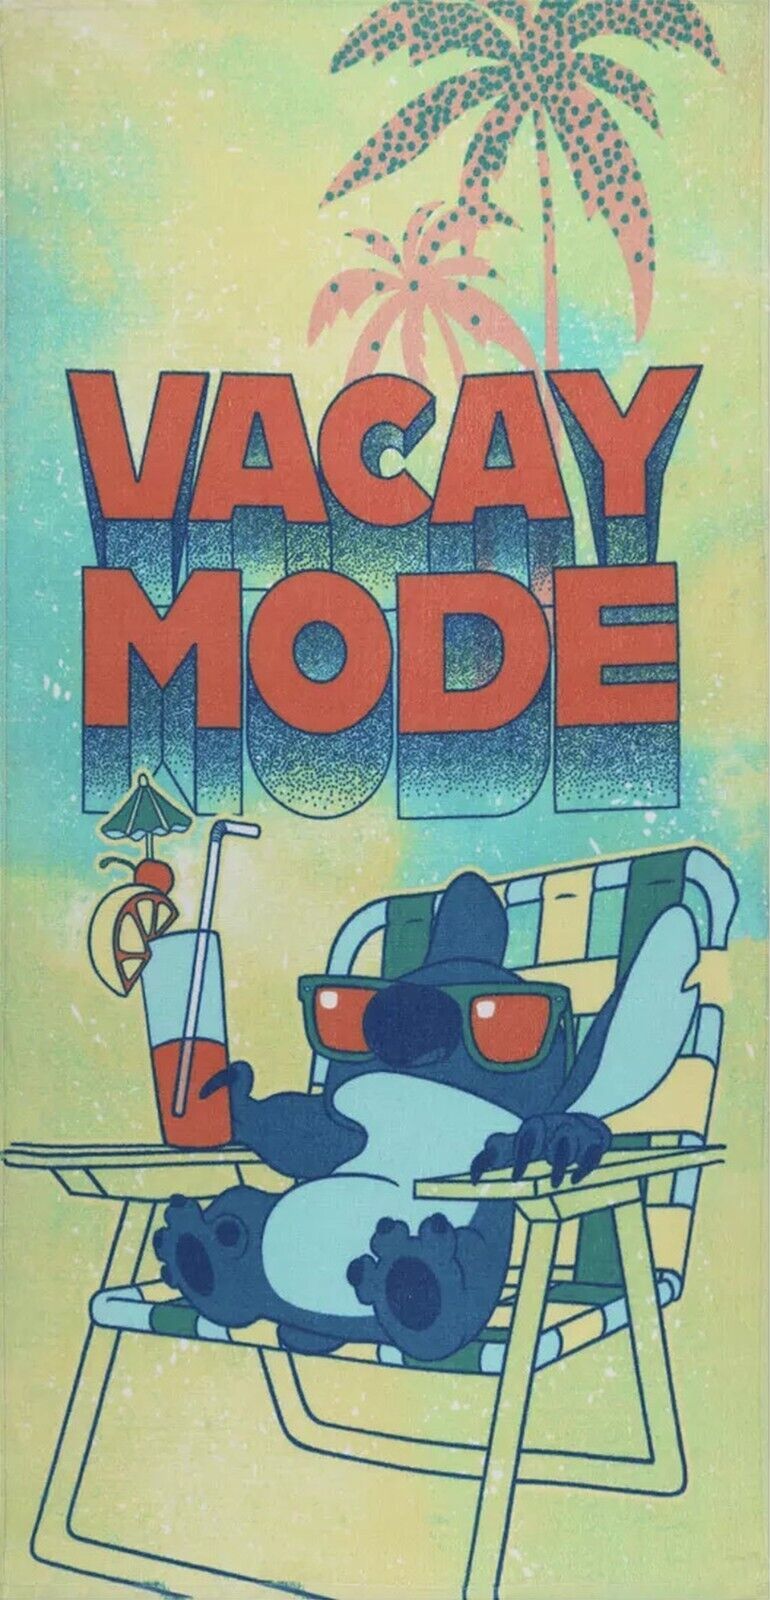 Disney's Stitch Vacay Mode Beach Towel Measures 28 x 58 inches - $16.78